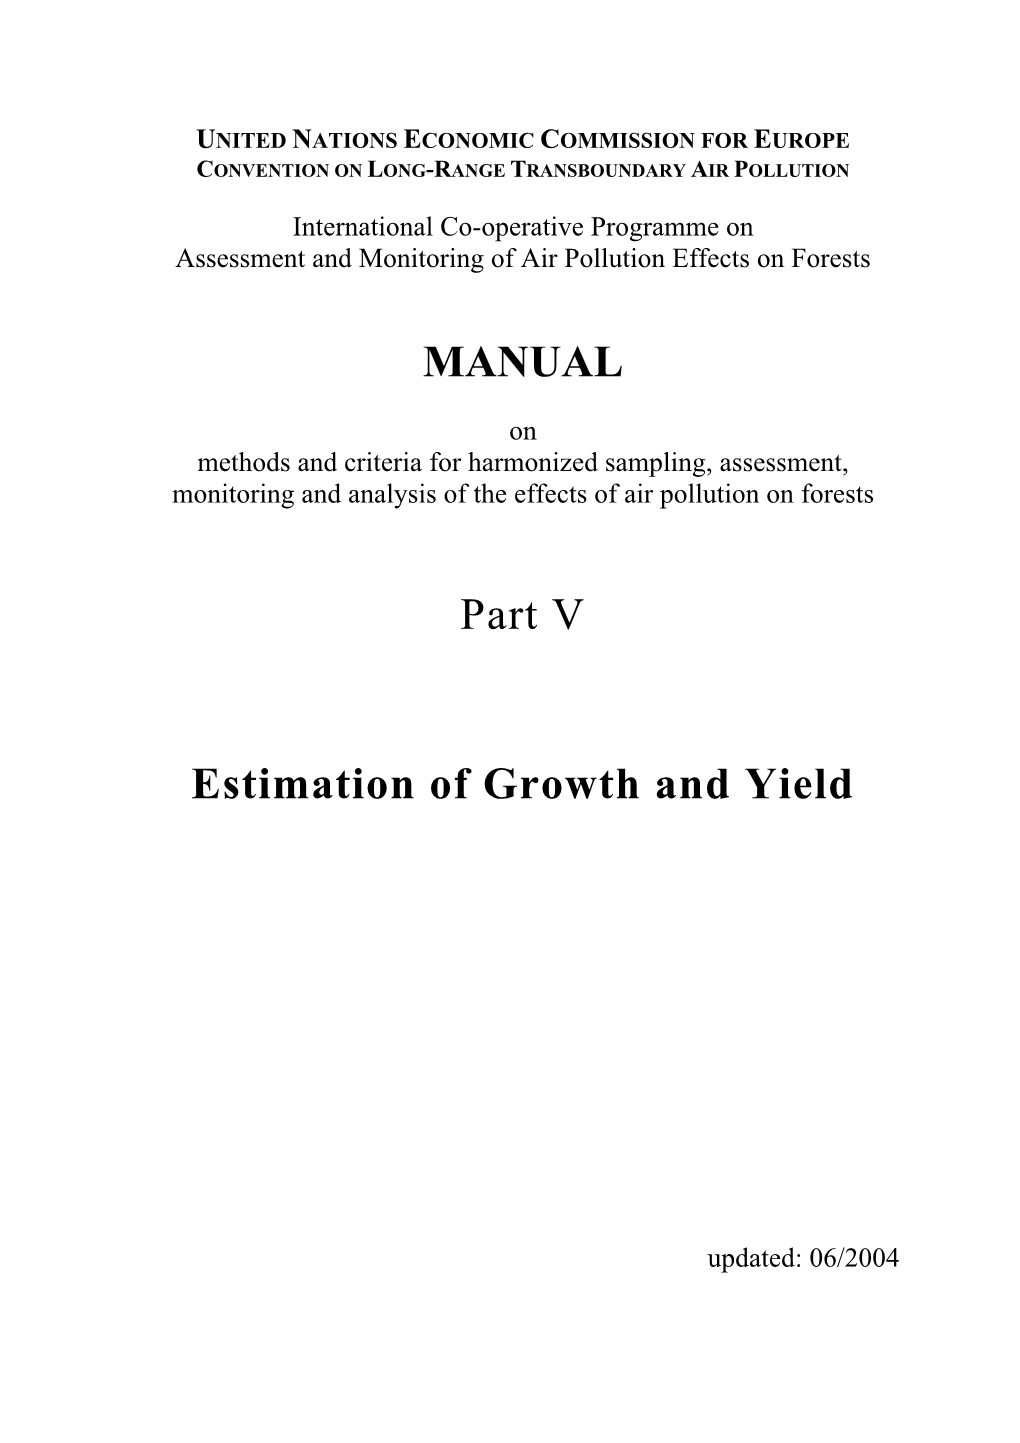 MANUAL Part V Estimation of Growth and Yield